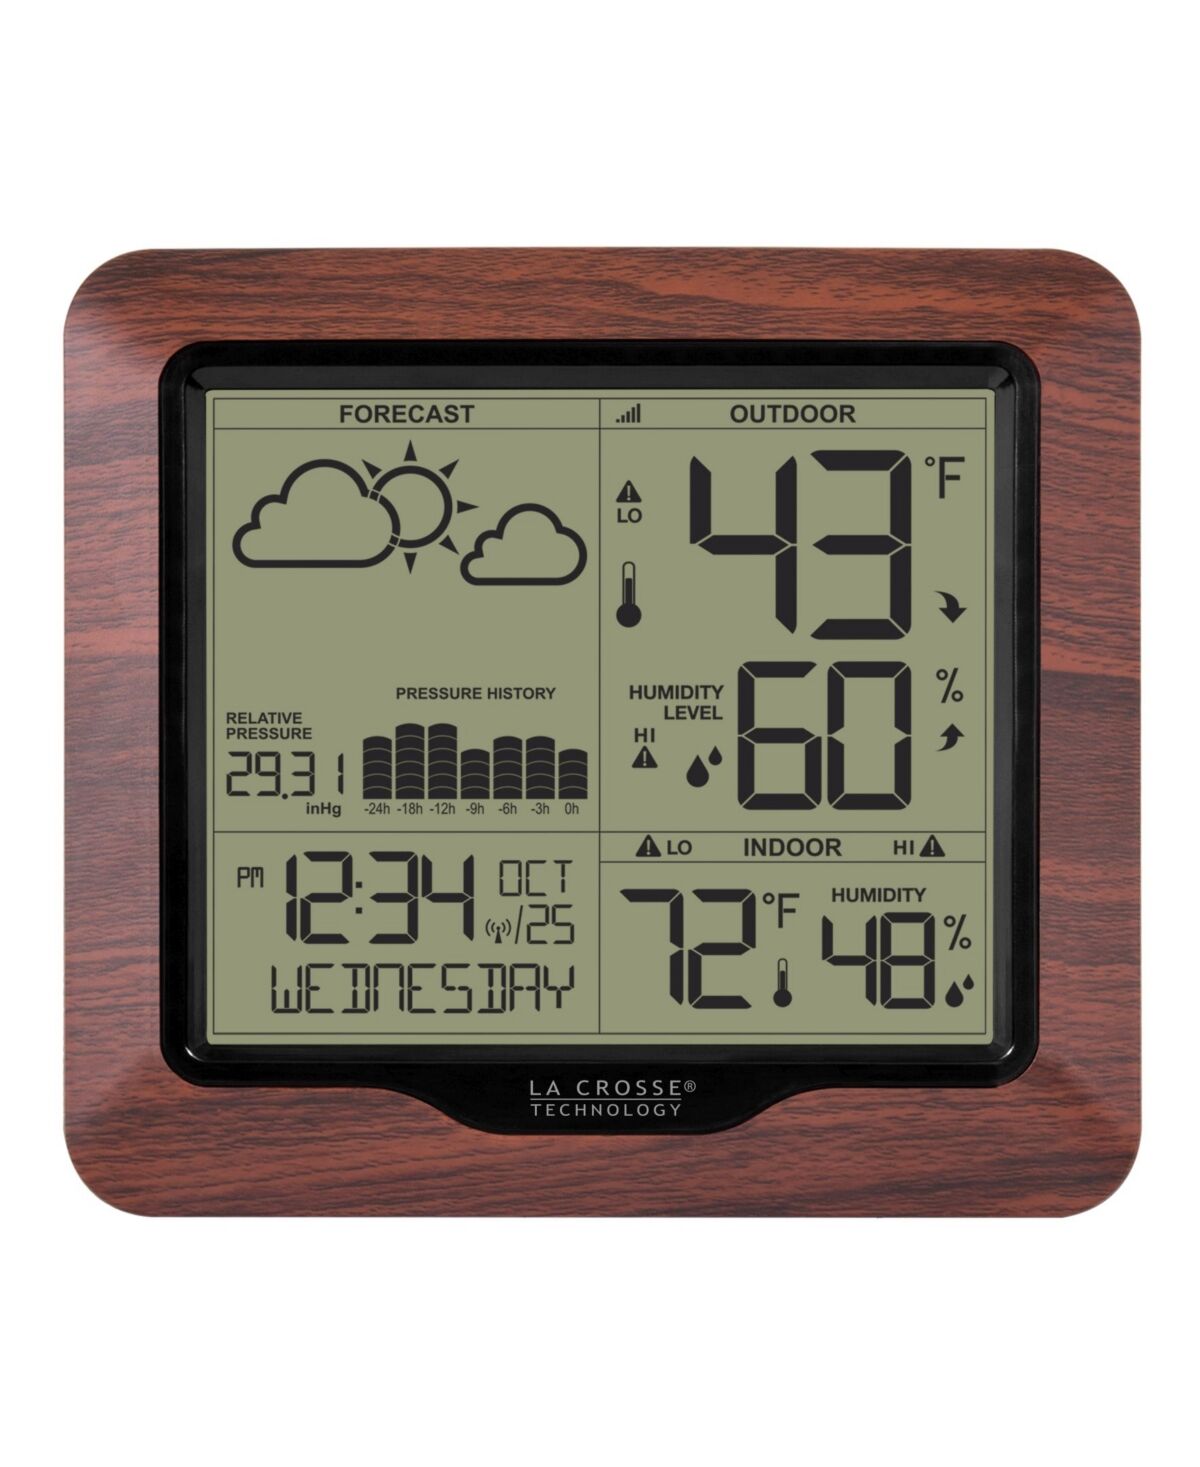 La Crosse Technology 308-1417BL Backlight Wireless Forecast Station with Pressure History - Brown